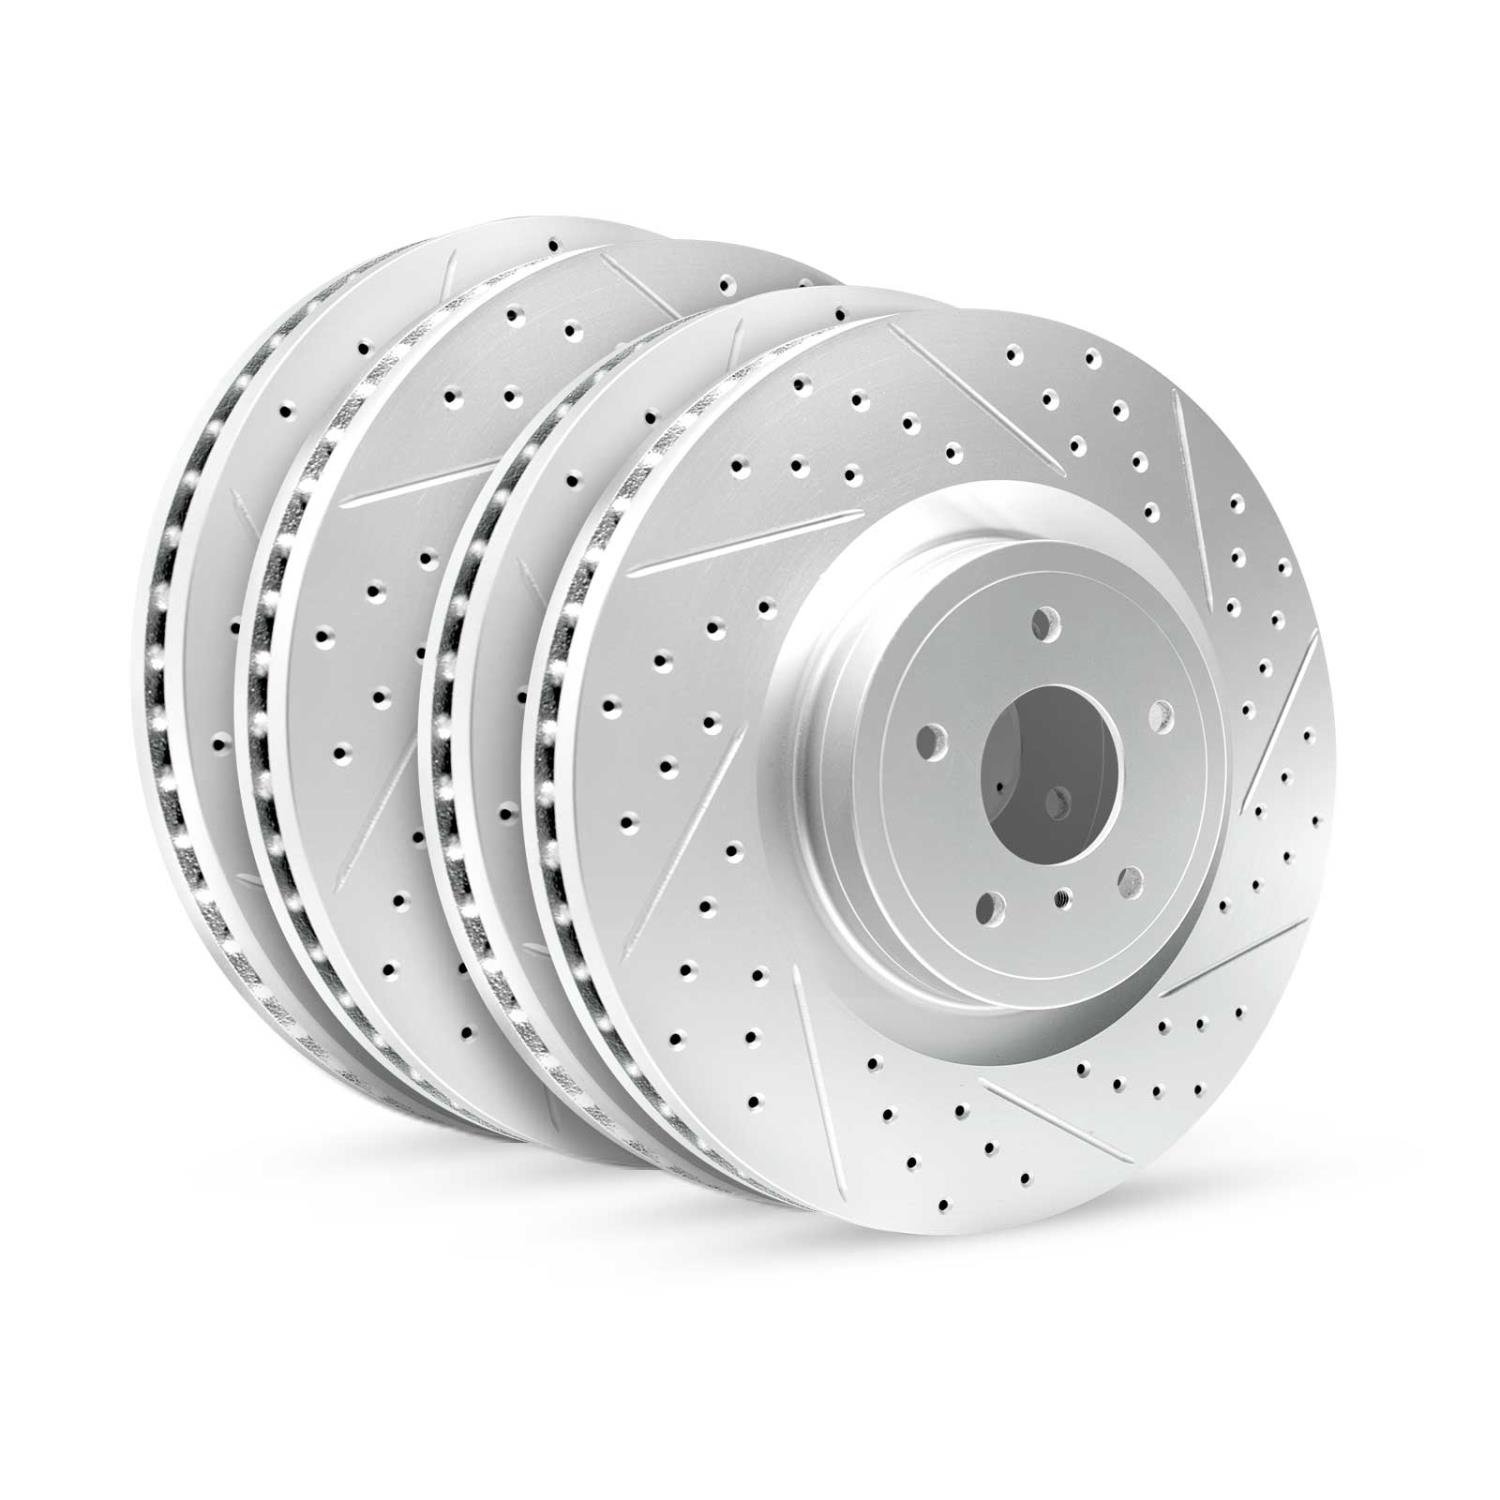 GEO-Carbon Drilled/Slotted Rotors, 2015-2019 Fits Multiple Makes/Models, Position: Front/Rear